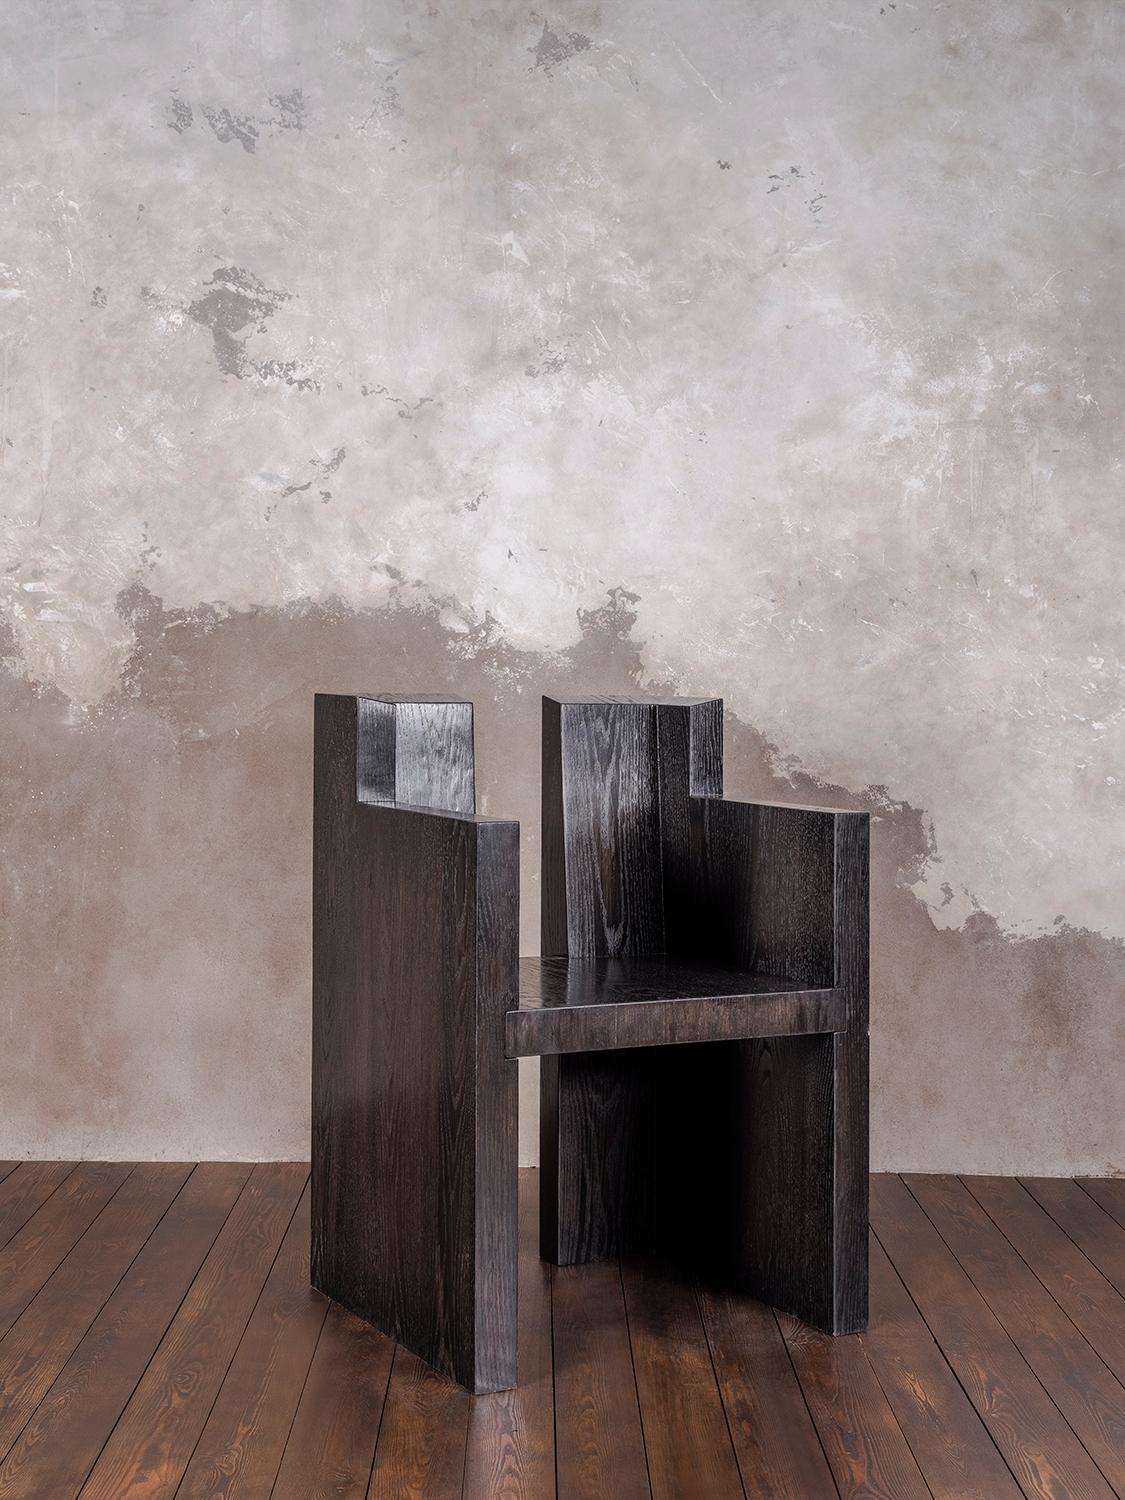 For winged armchair by Alexandr Pinchuk
Dimensions: 55 x 67 x H 90 cm
Materials: Plywood, oak and oil.




 